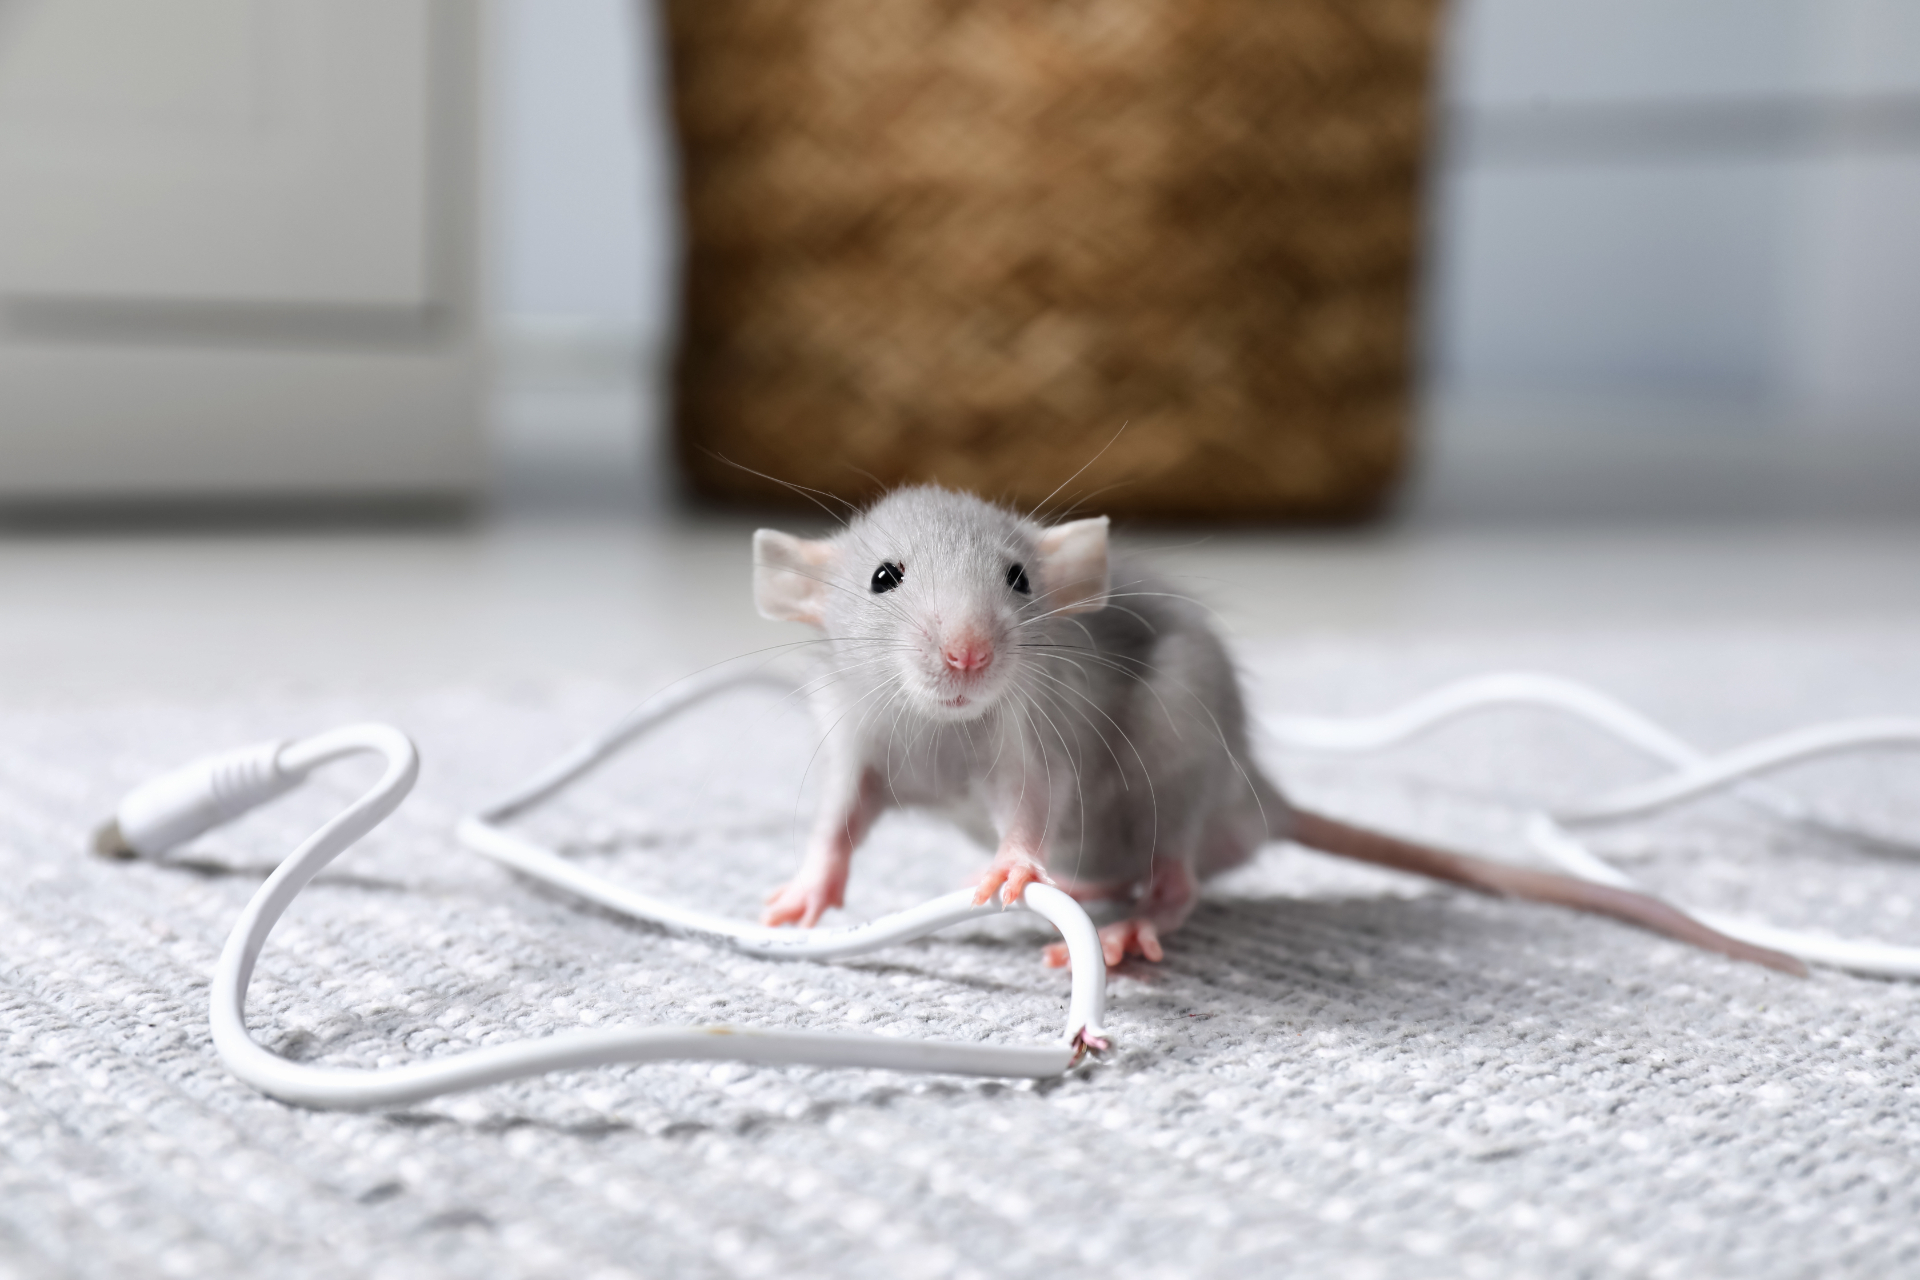 HOW DO MICE AND RATS DAMAGE HOMES?